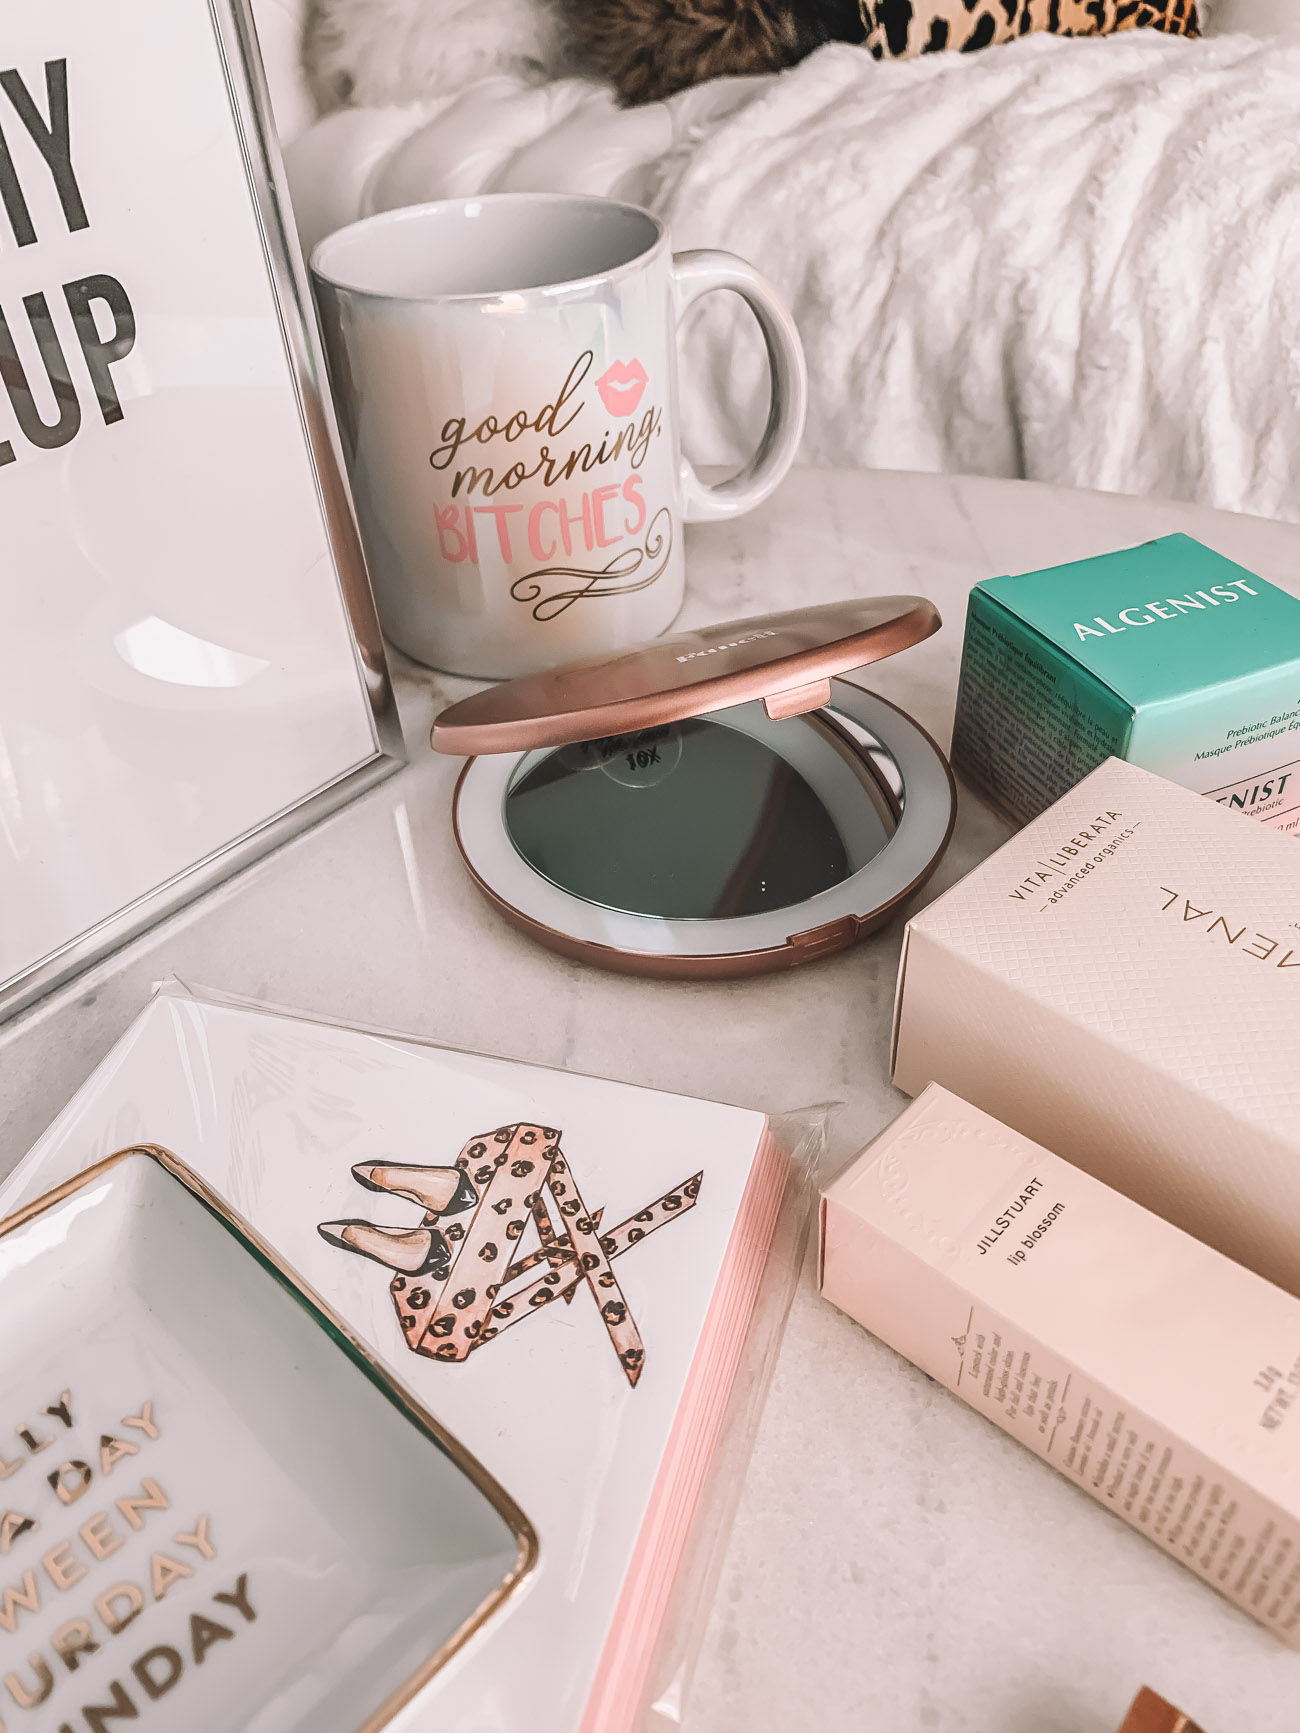 Summer Glam Giveaway | Siri, Remove My Makeup | Good Morning Bitches Coffee Mug | Blondie in the City by Hayley Larue